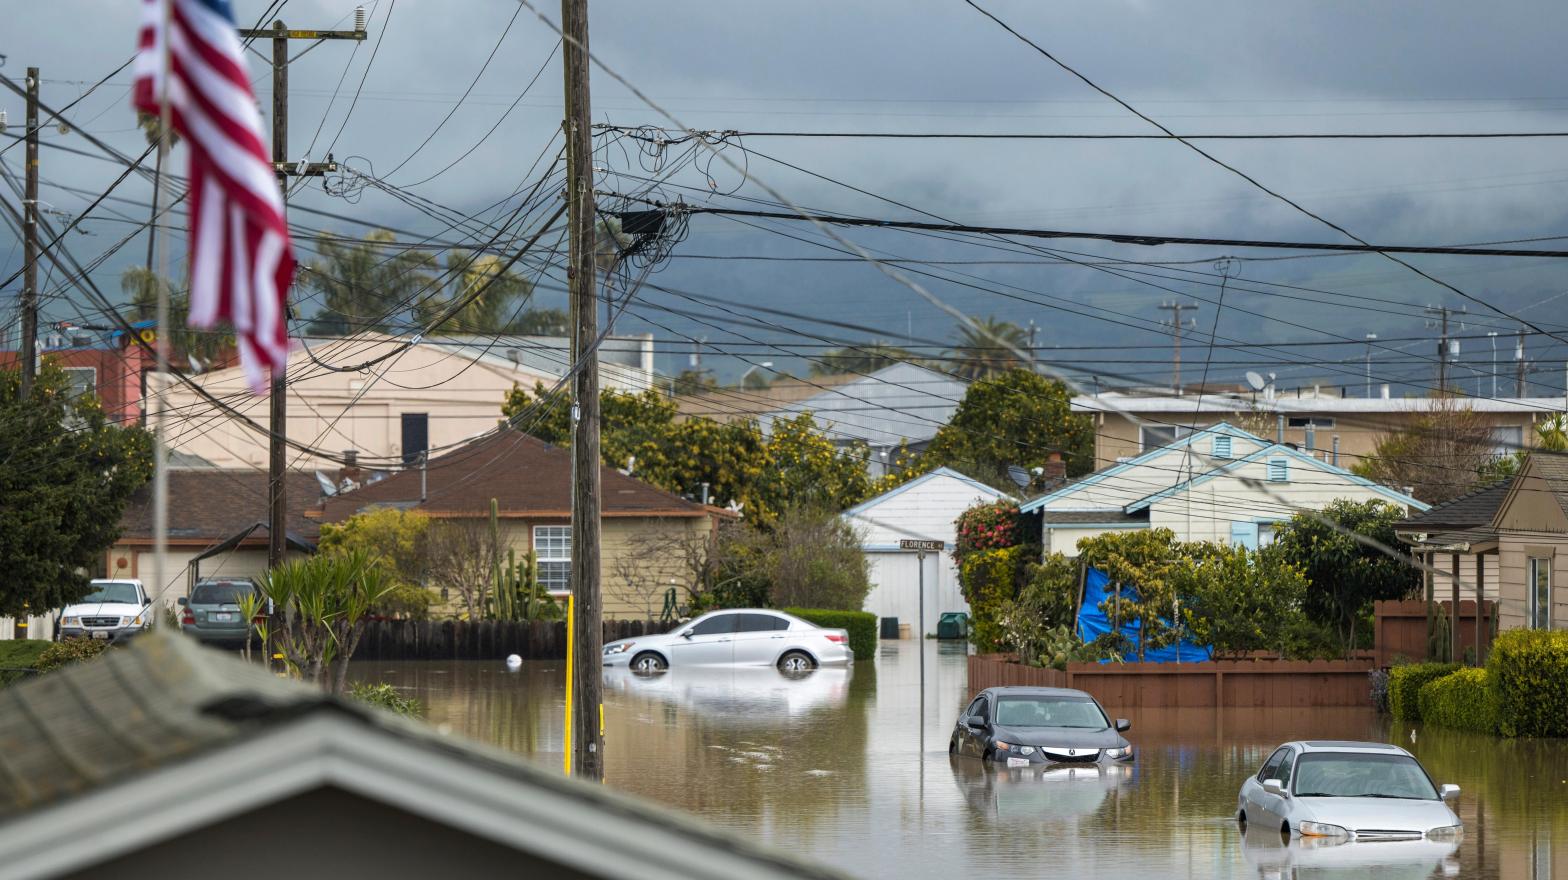 Cars sit partially submerged in floodwaters in Watsonville, Calif., Saturday, March 11, 2023. (Photo: Nic Coury, AP)